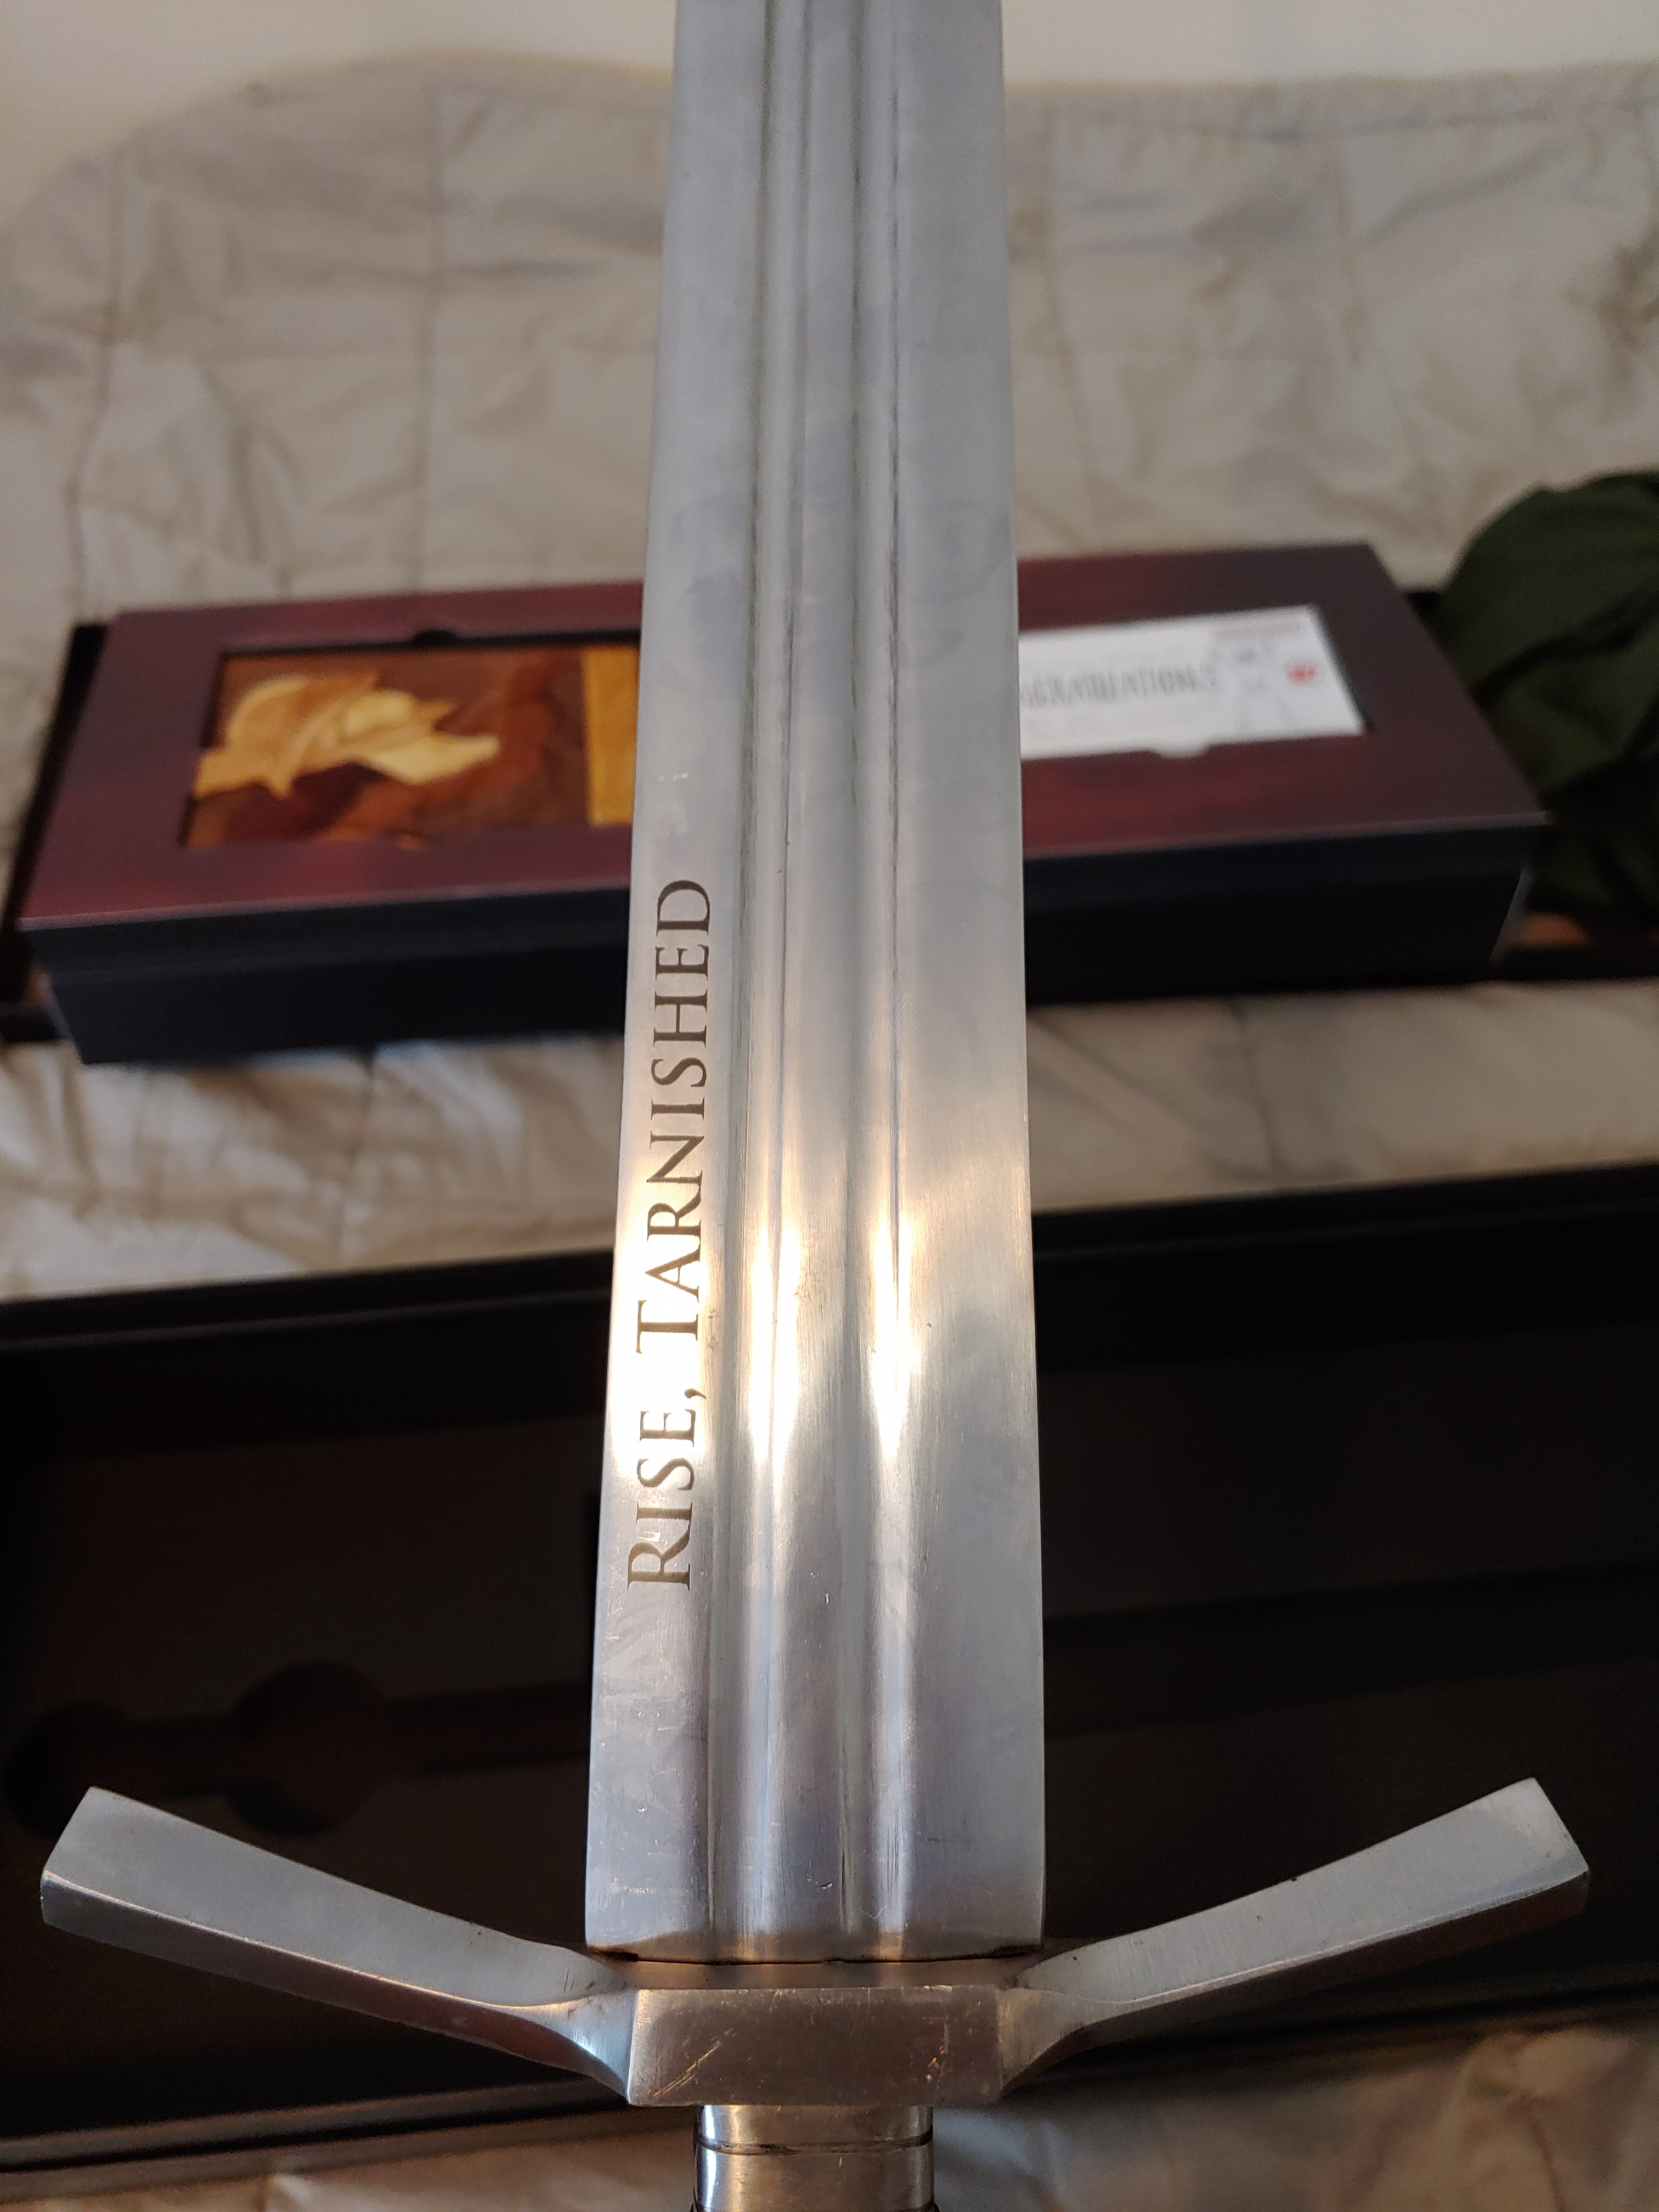 Bandai gave Elden Ring player 'Let Me Solo Her' a real sword